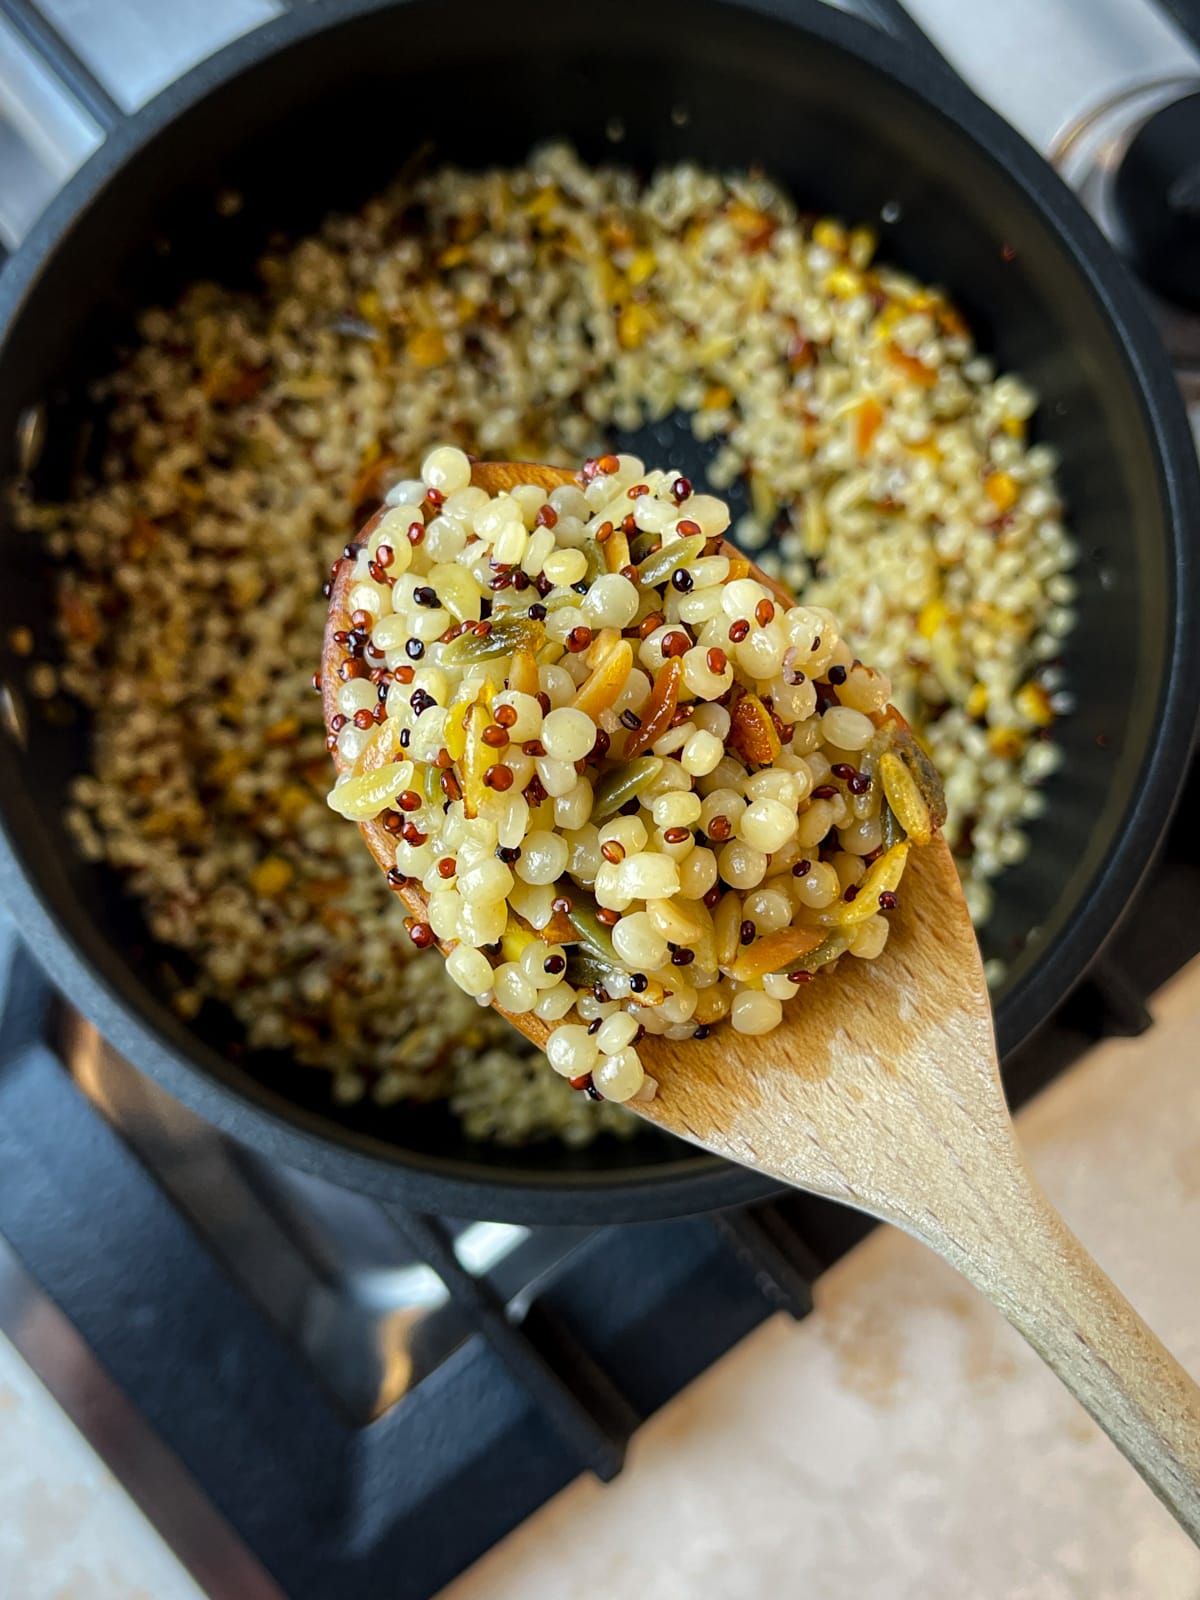 A wooden spoon holding up a blend of couscous and quinoa over a pot on a stove.